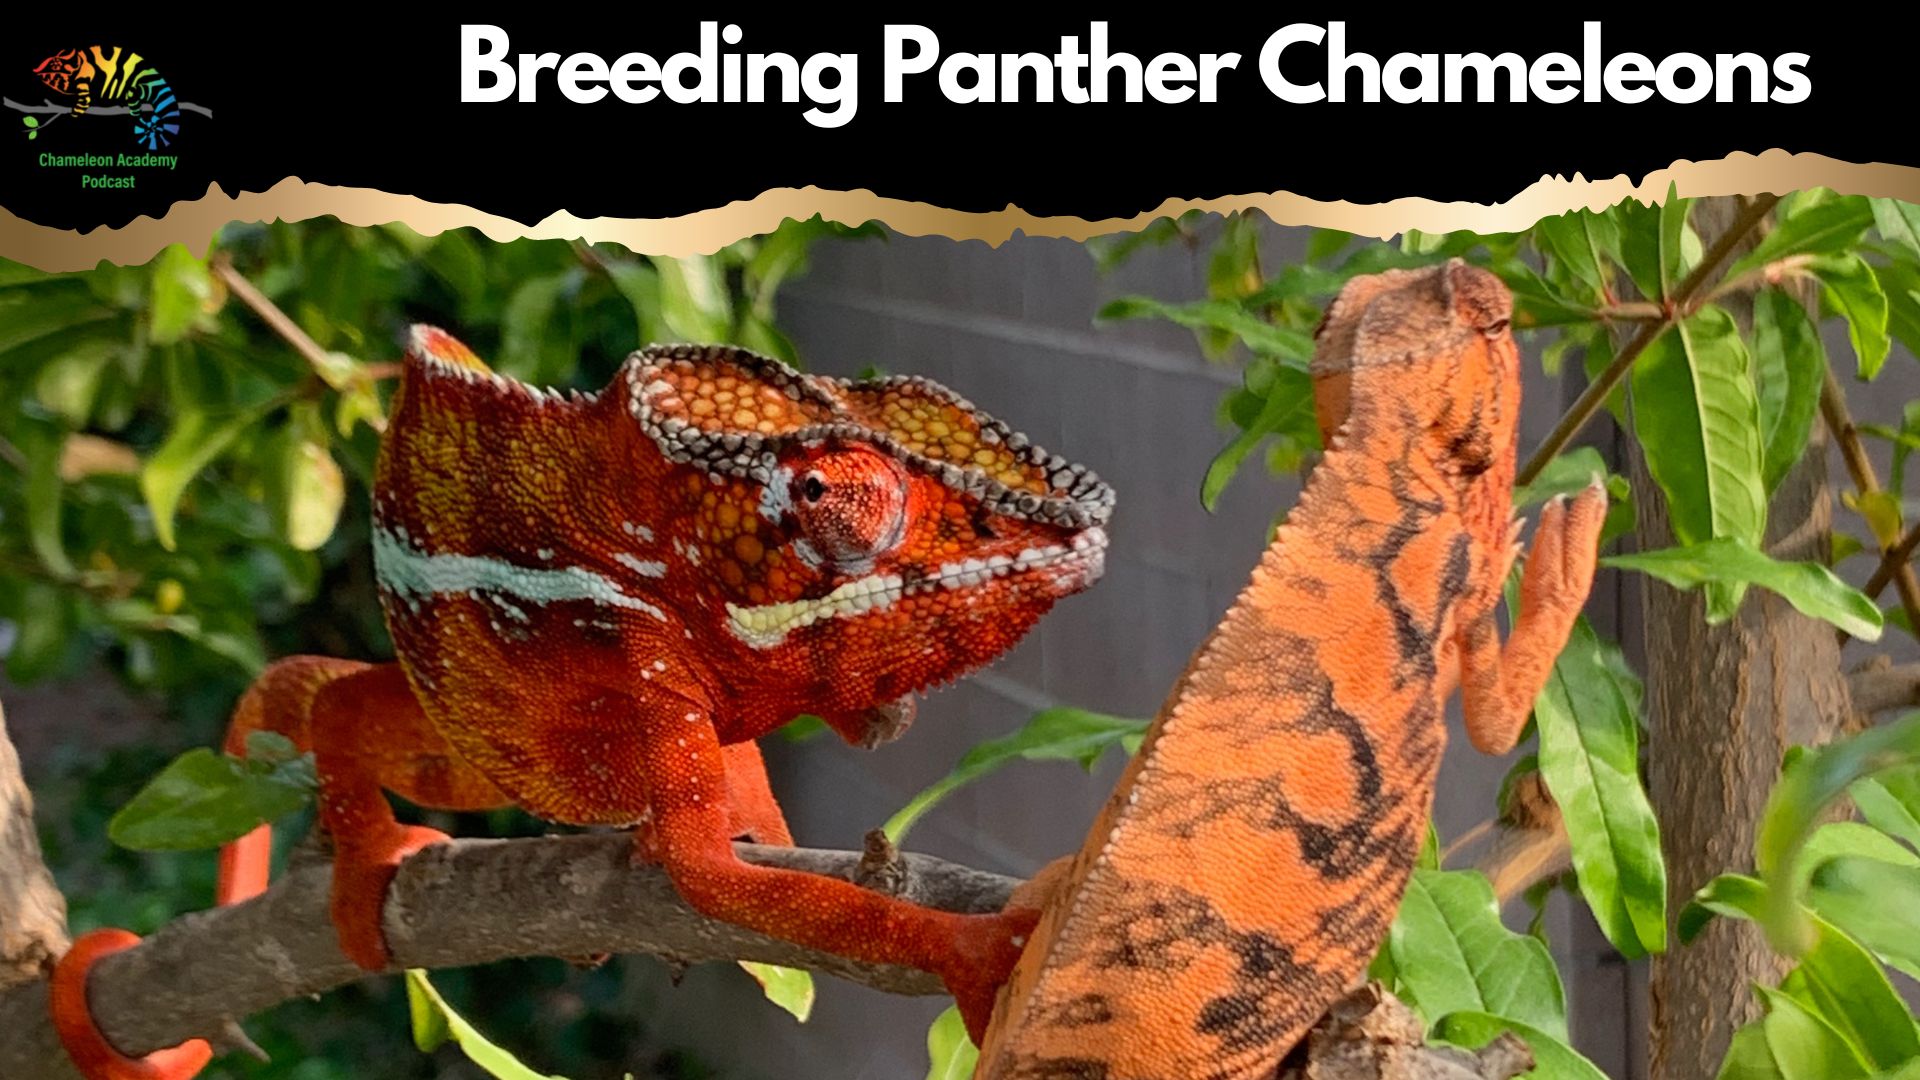 Every Chameleon Knows Its Color Being